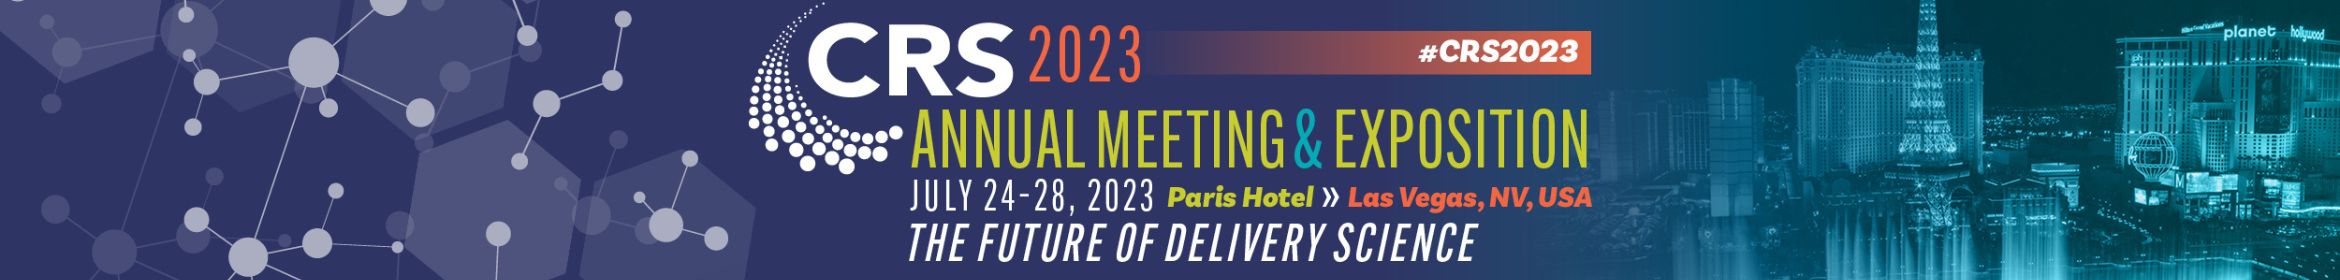 CRS 2023 Annual Meeting and Expo Main banner